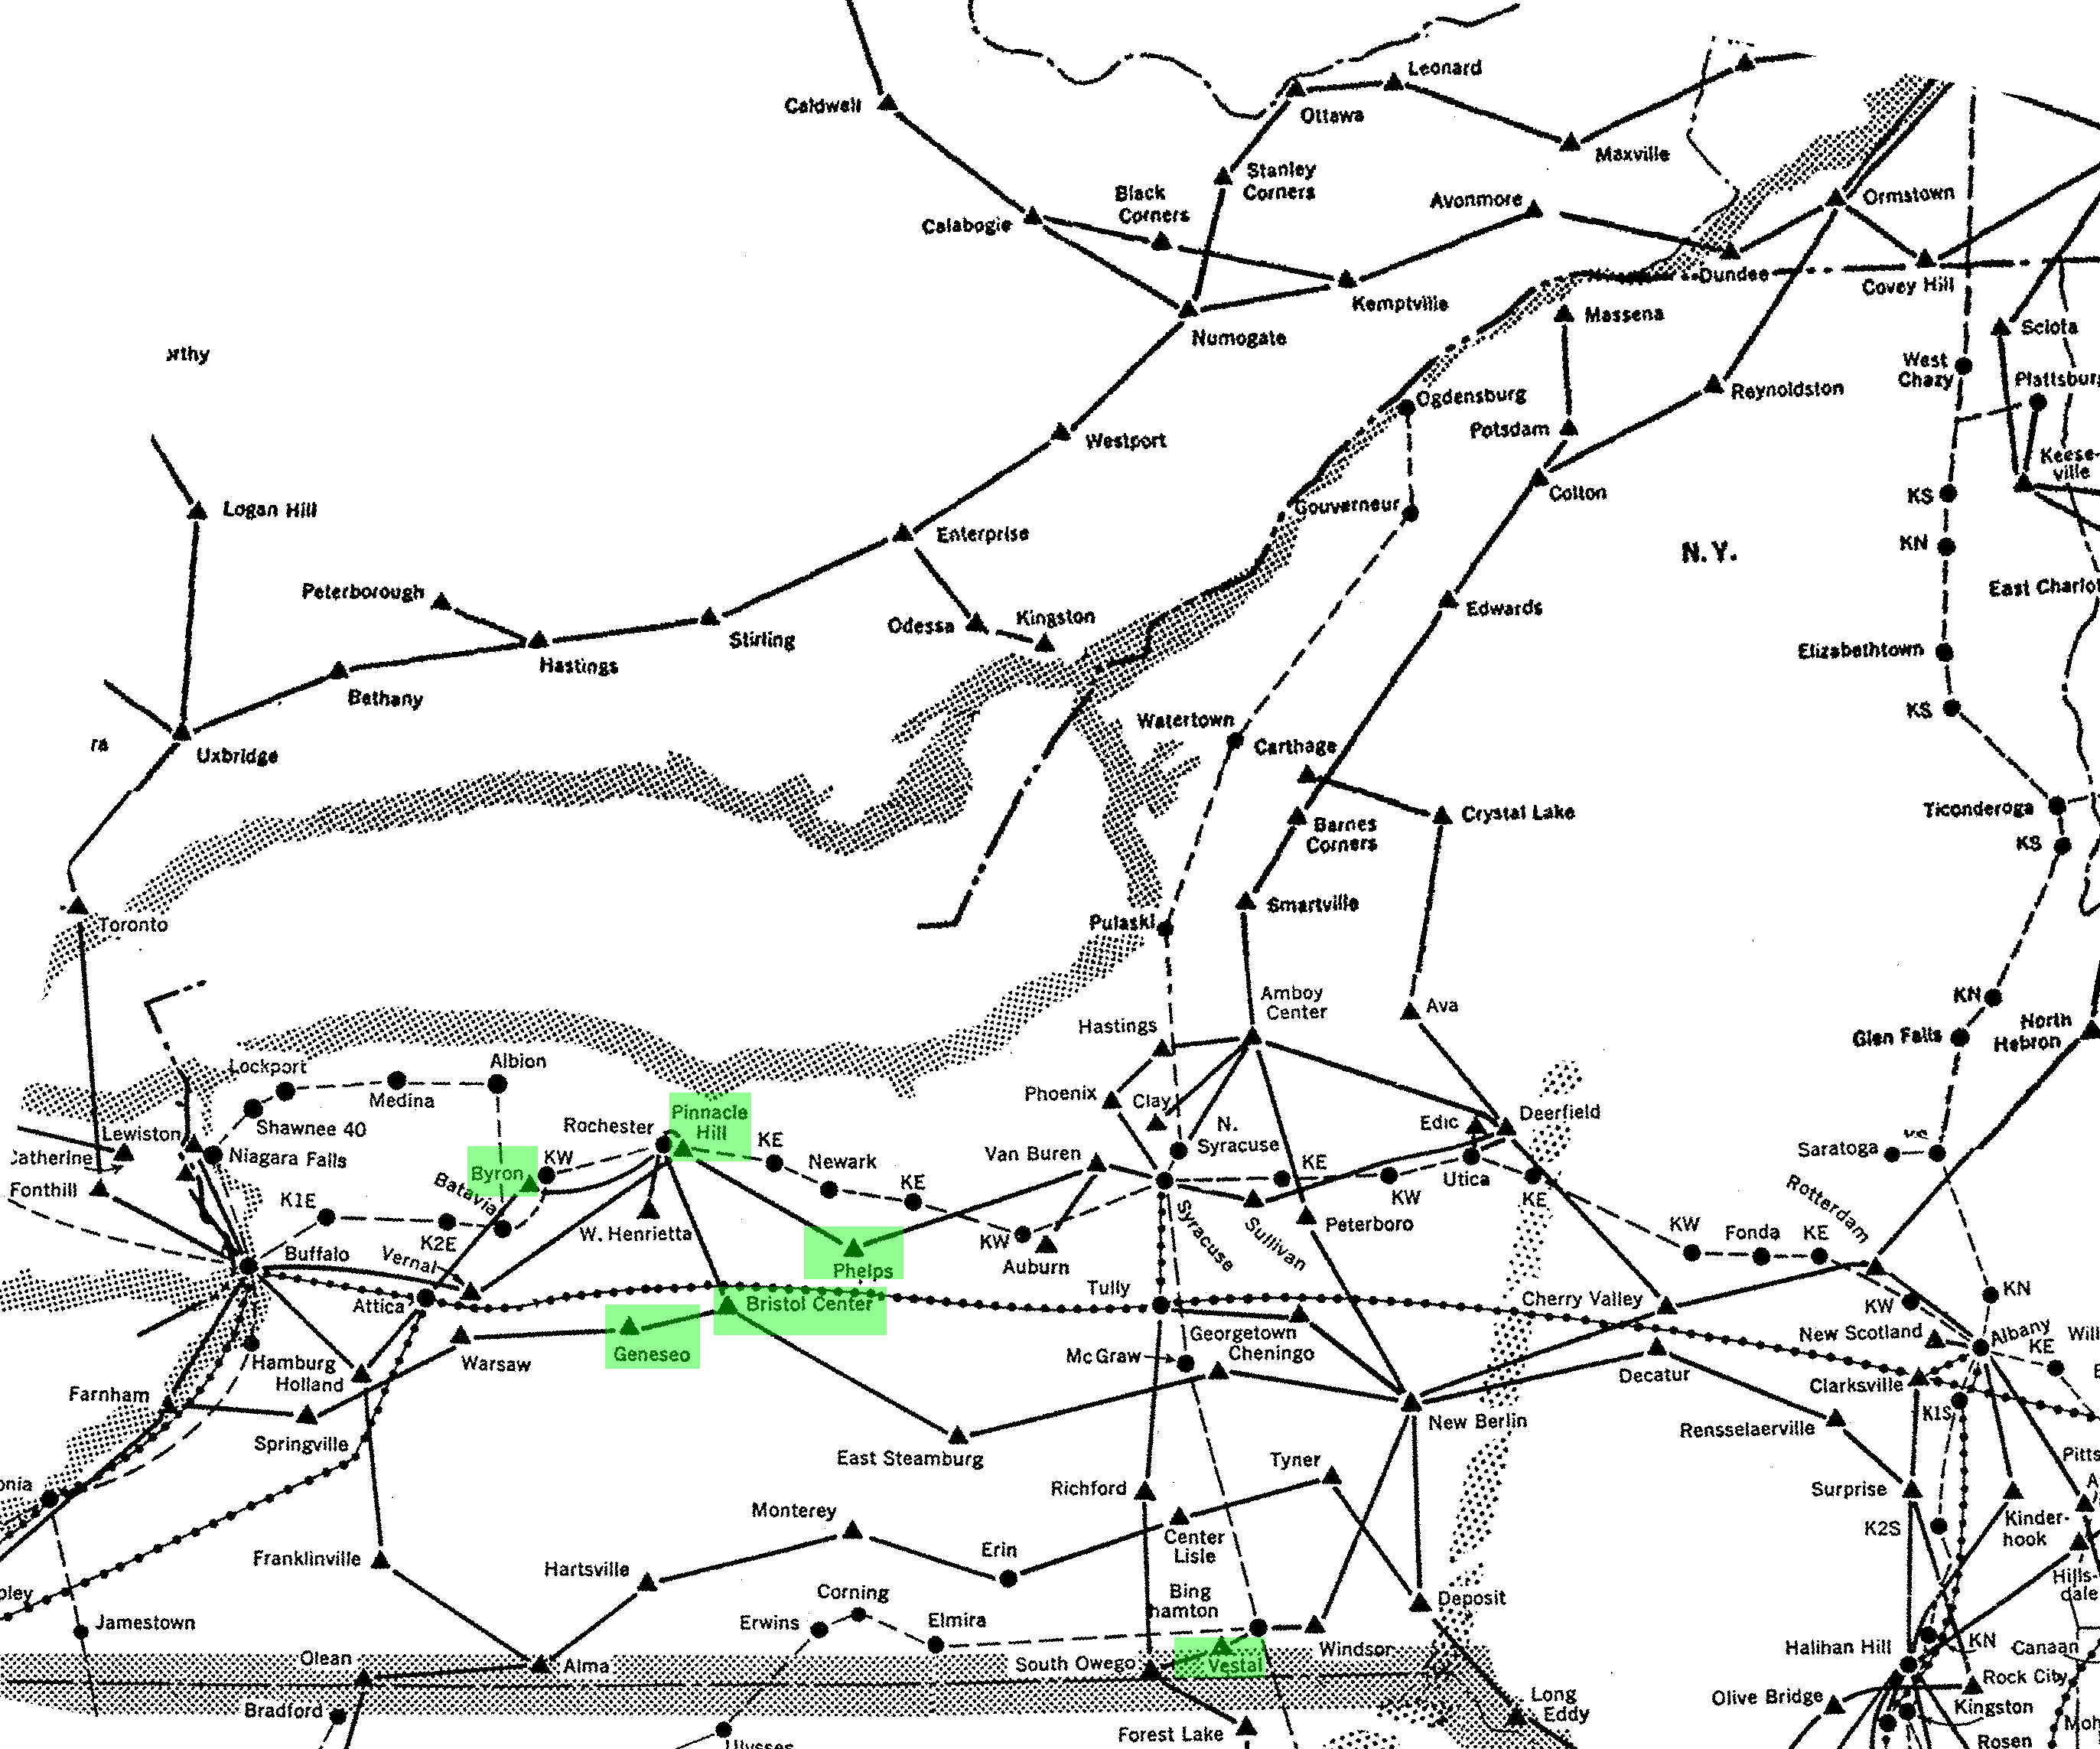 A map of AT&T/Bell Long Lines towers in upstate New York state